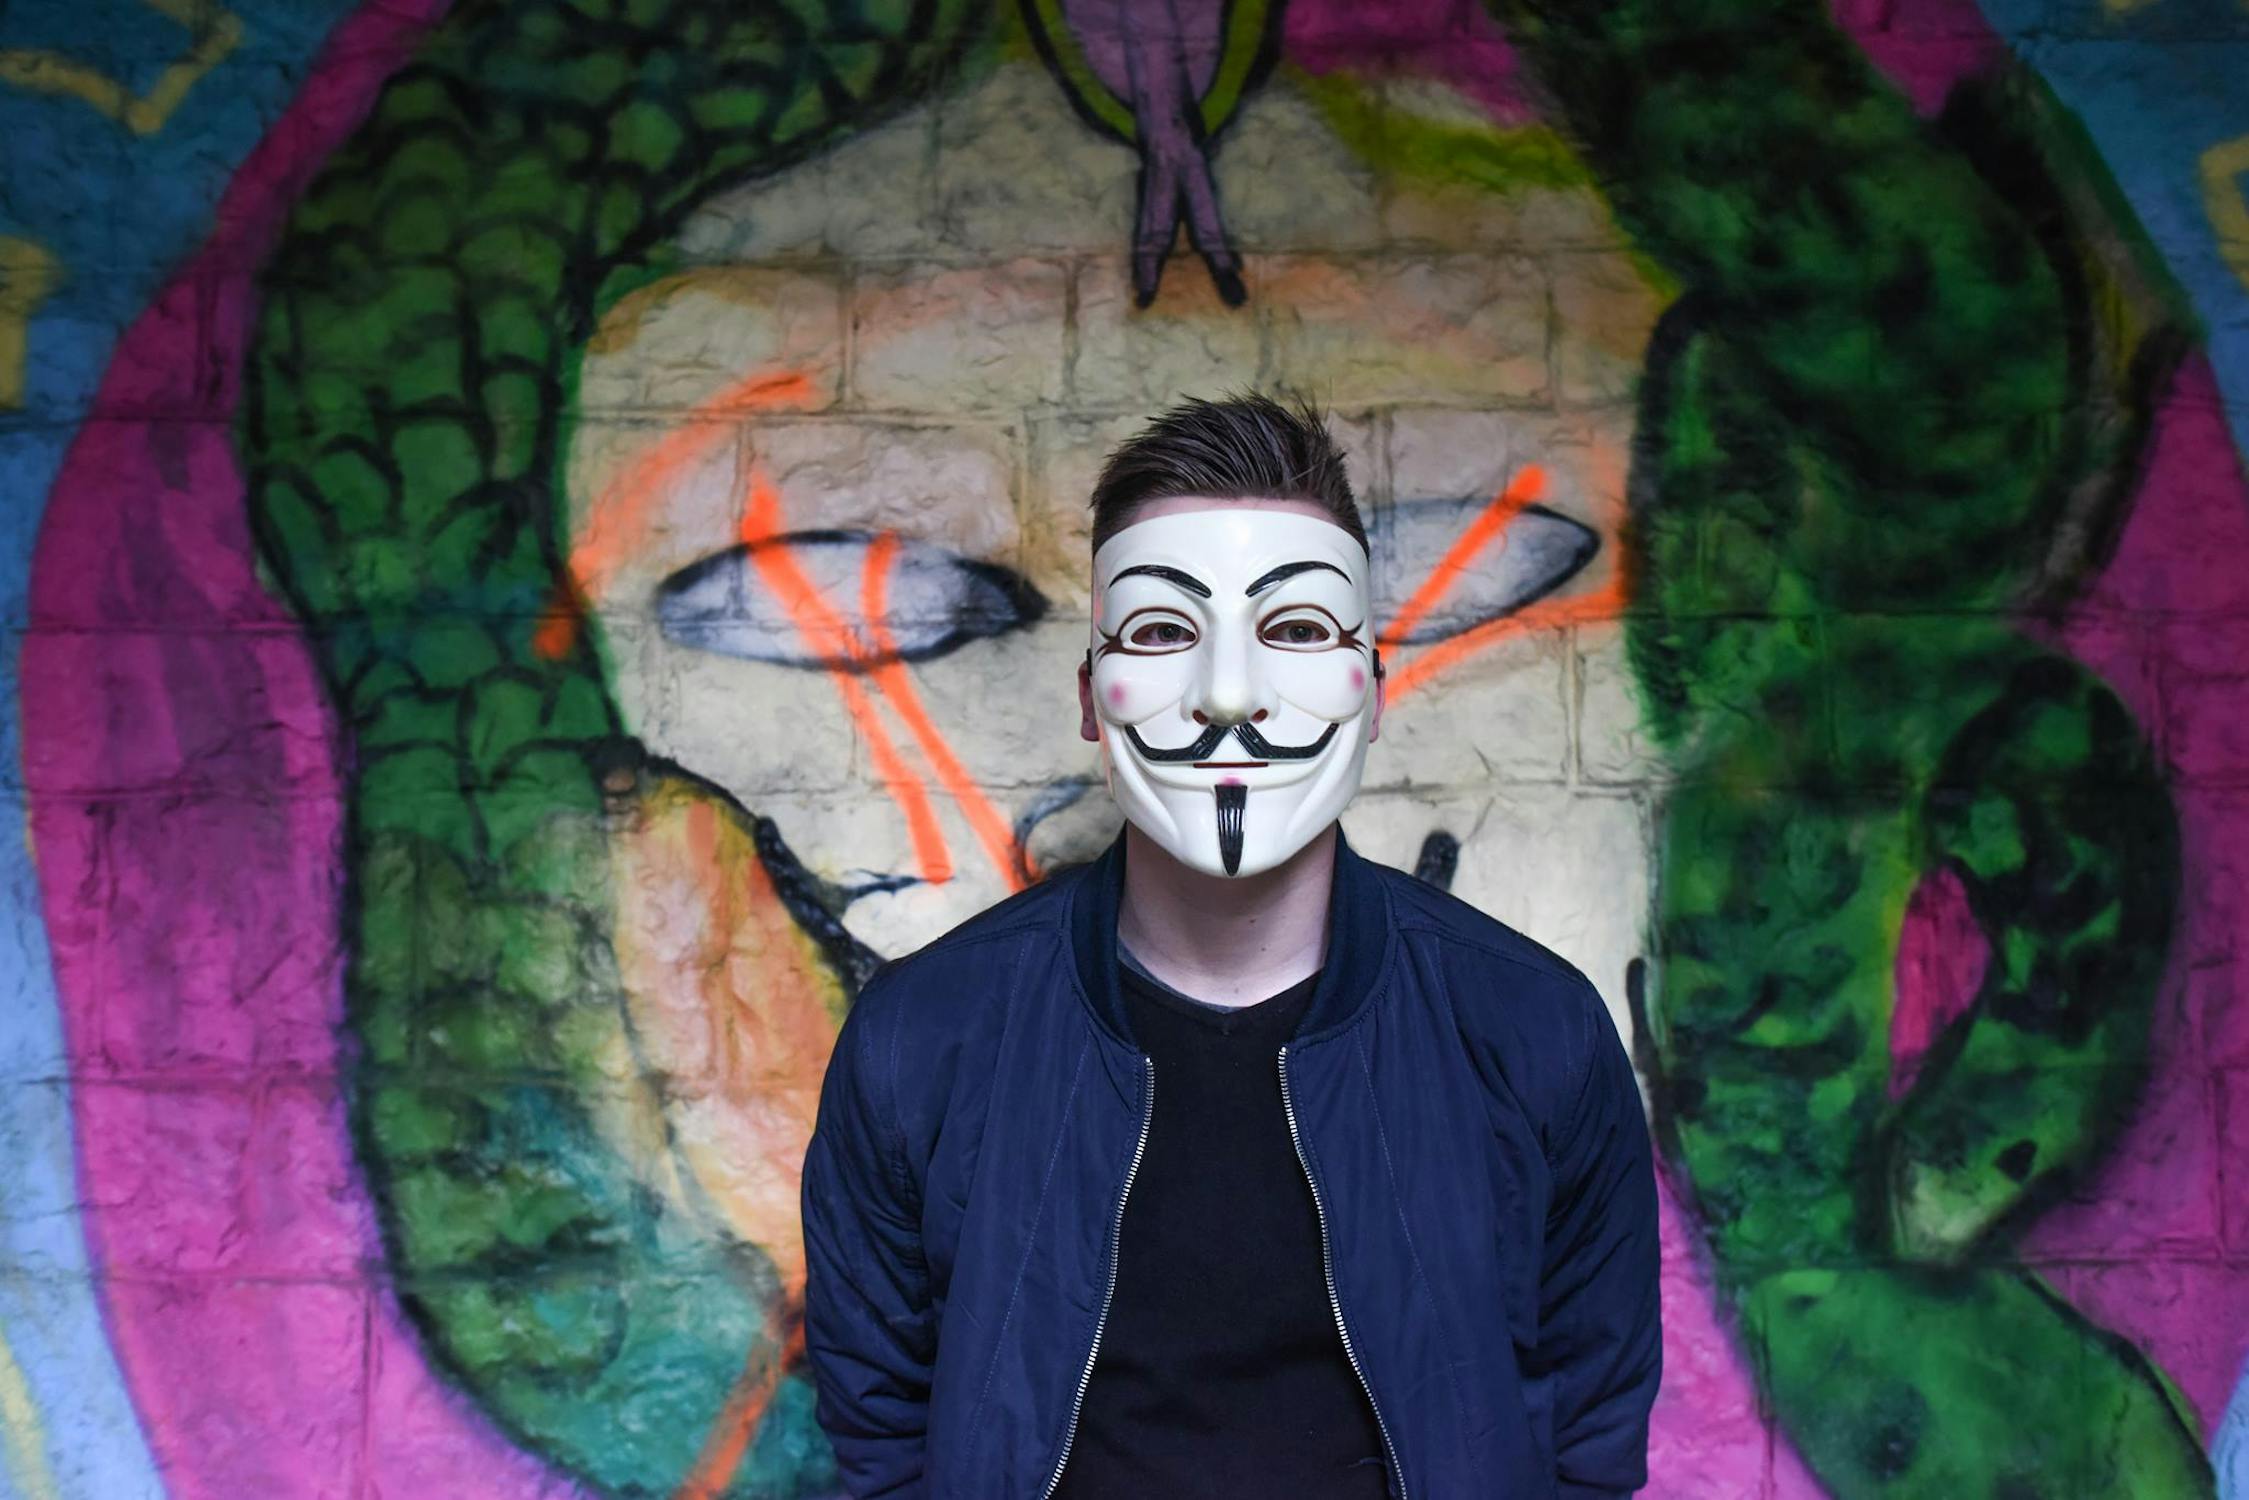 Hacker Photo by thomas vanhaecht from Pexels: https://www.pexels.com/photo/man-in-white-mask-in-black-crew-neck-shirt-and-blue-zip-up-jacket-infront-graffiti-wall-92129/